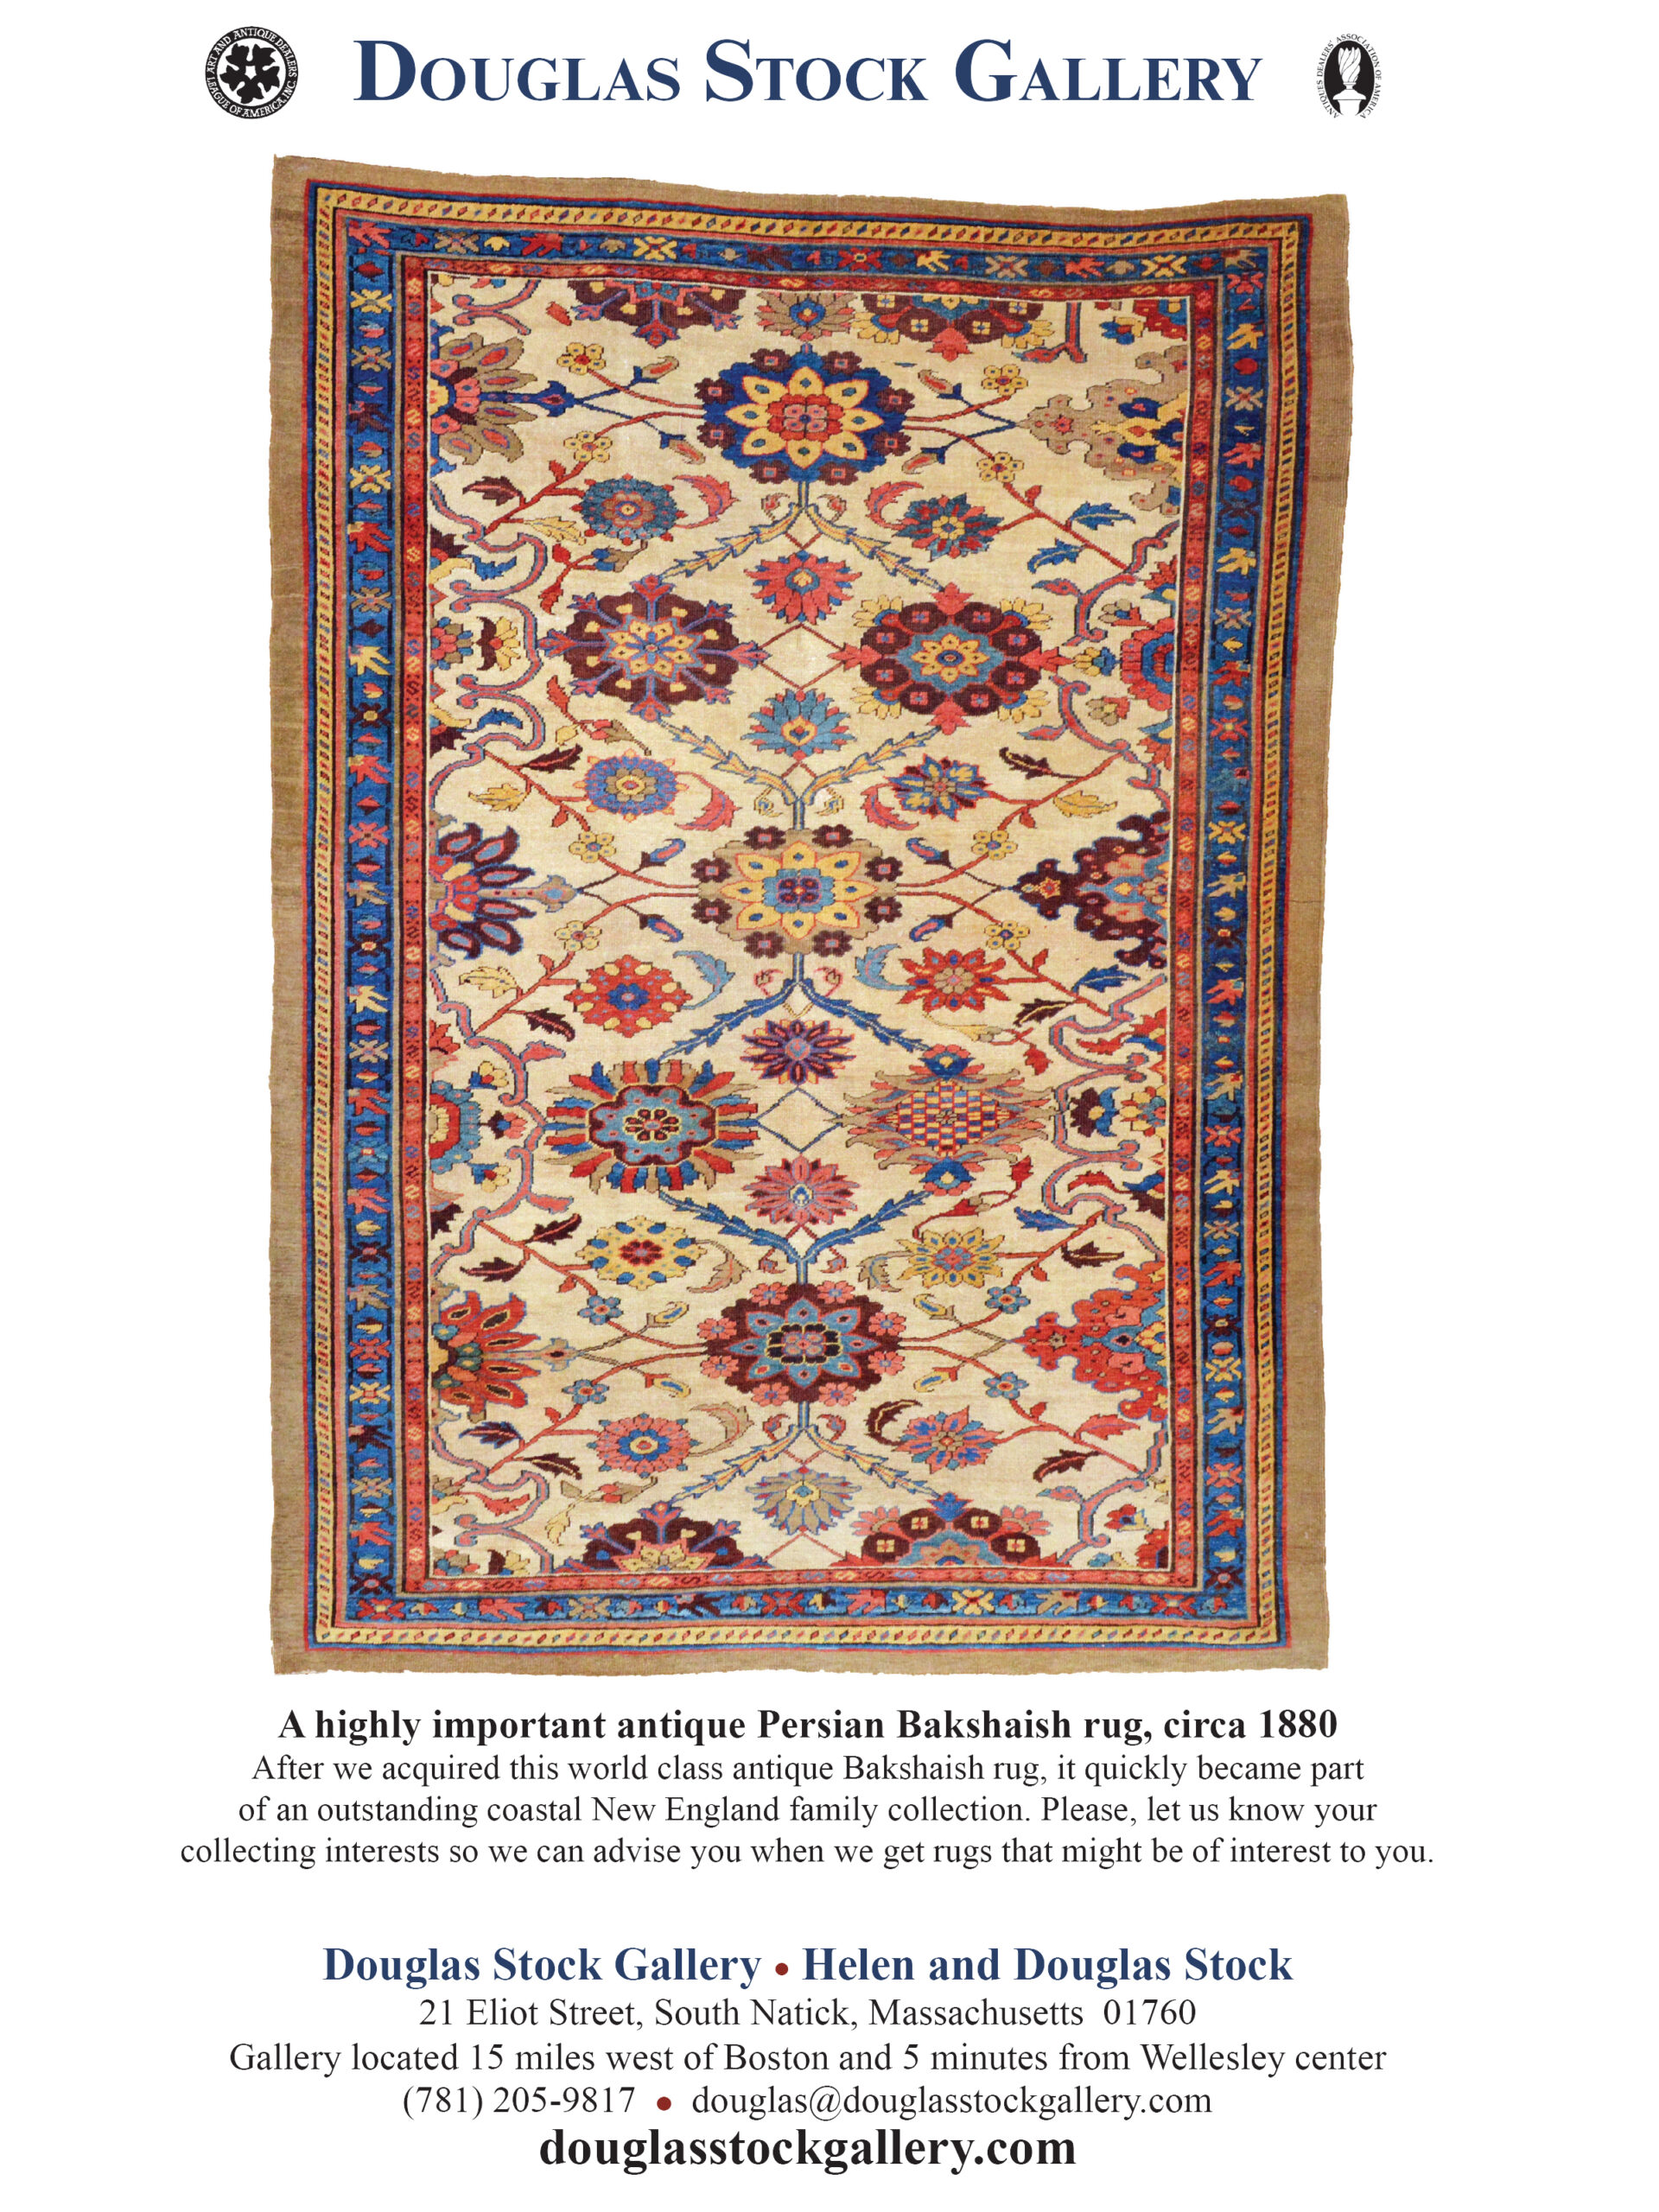 Douglas Stock Gallery advertisement for a highly important antique northwest Persian Bakshaish rug in the November / December 2021 issue of The Magazine Antiques